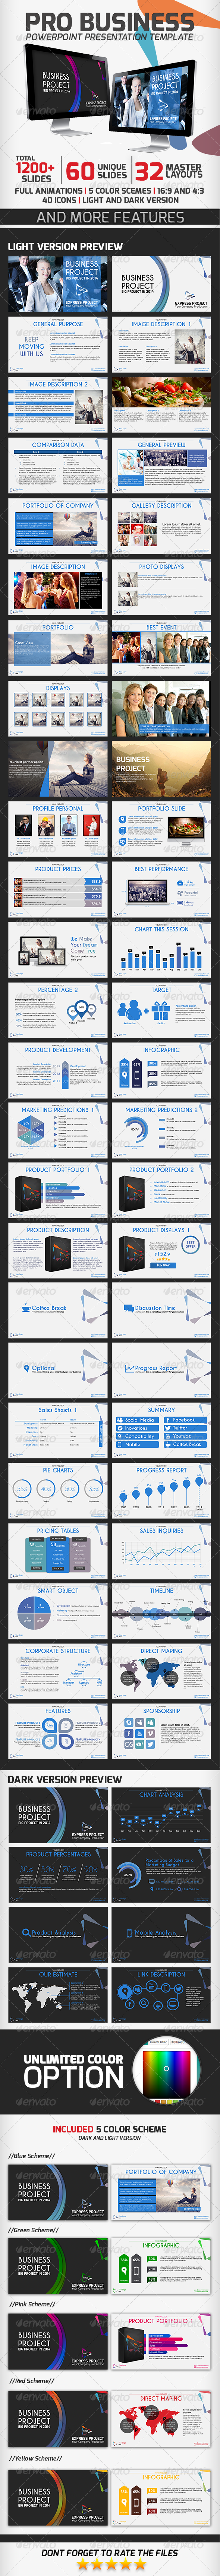 Pro Business PowerPoint Presentation Template